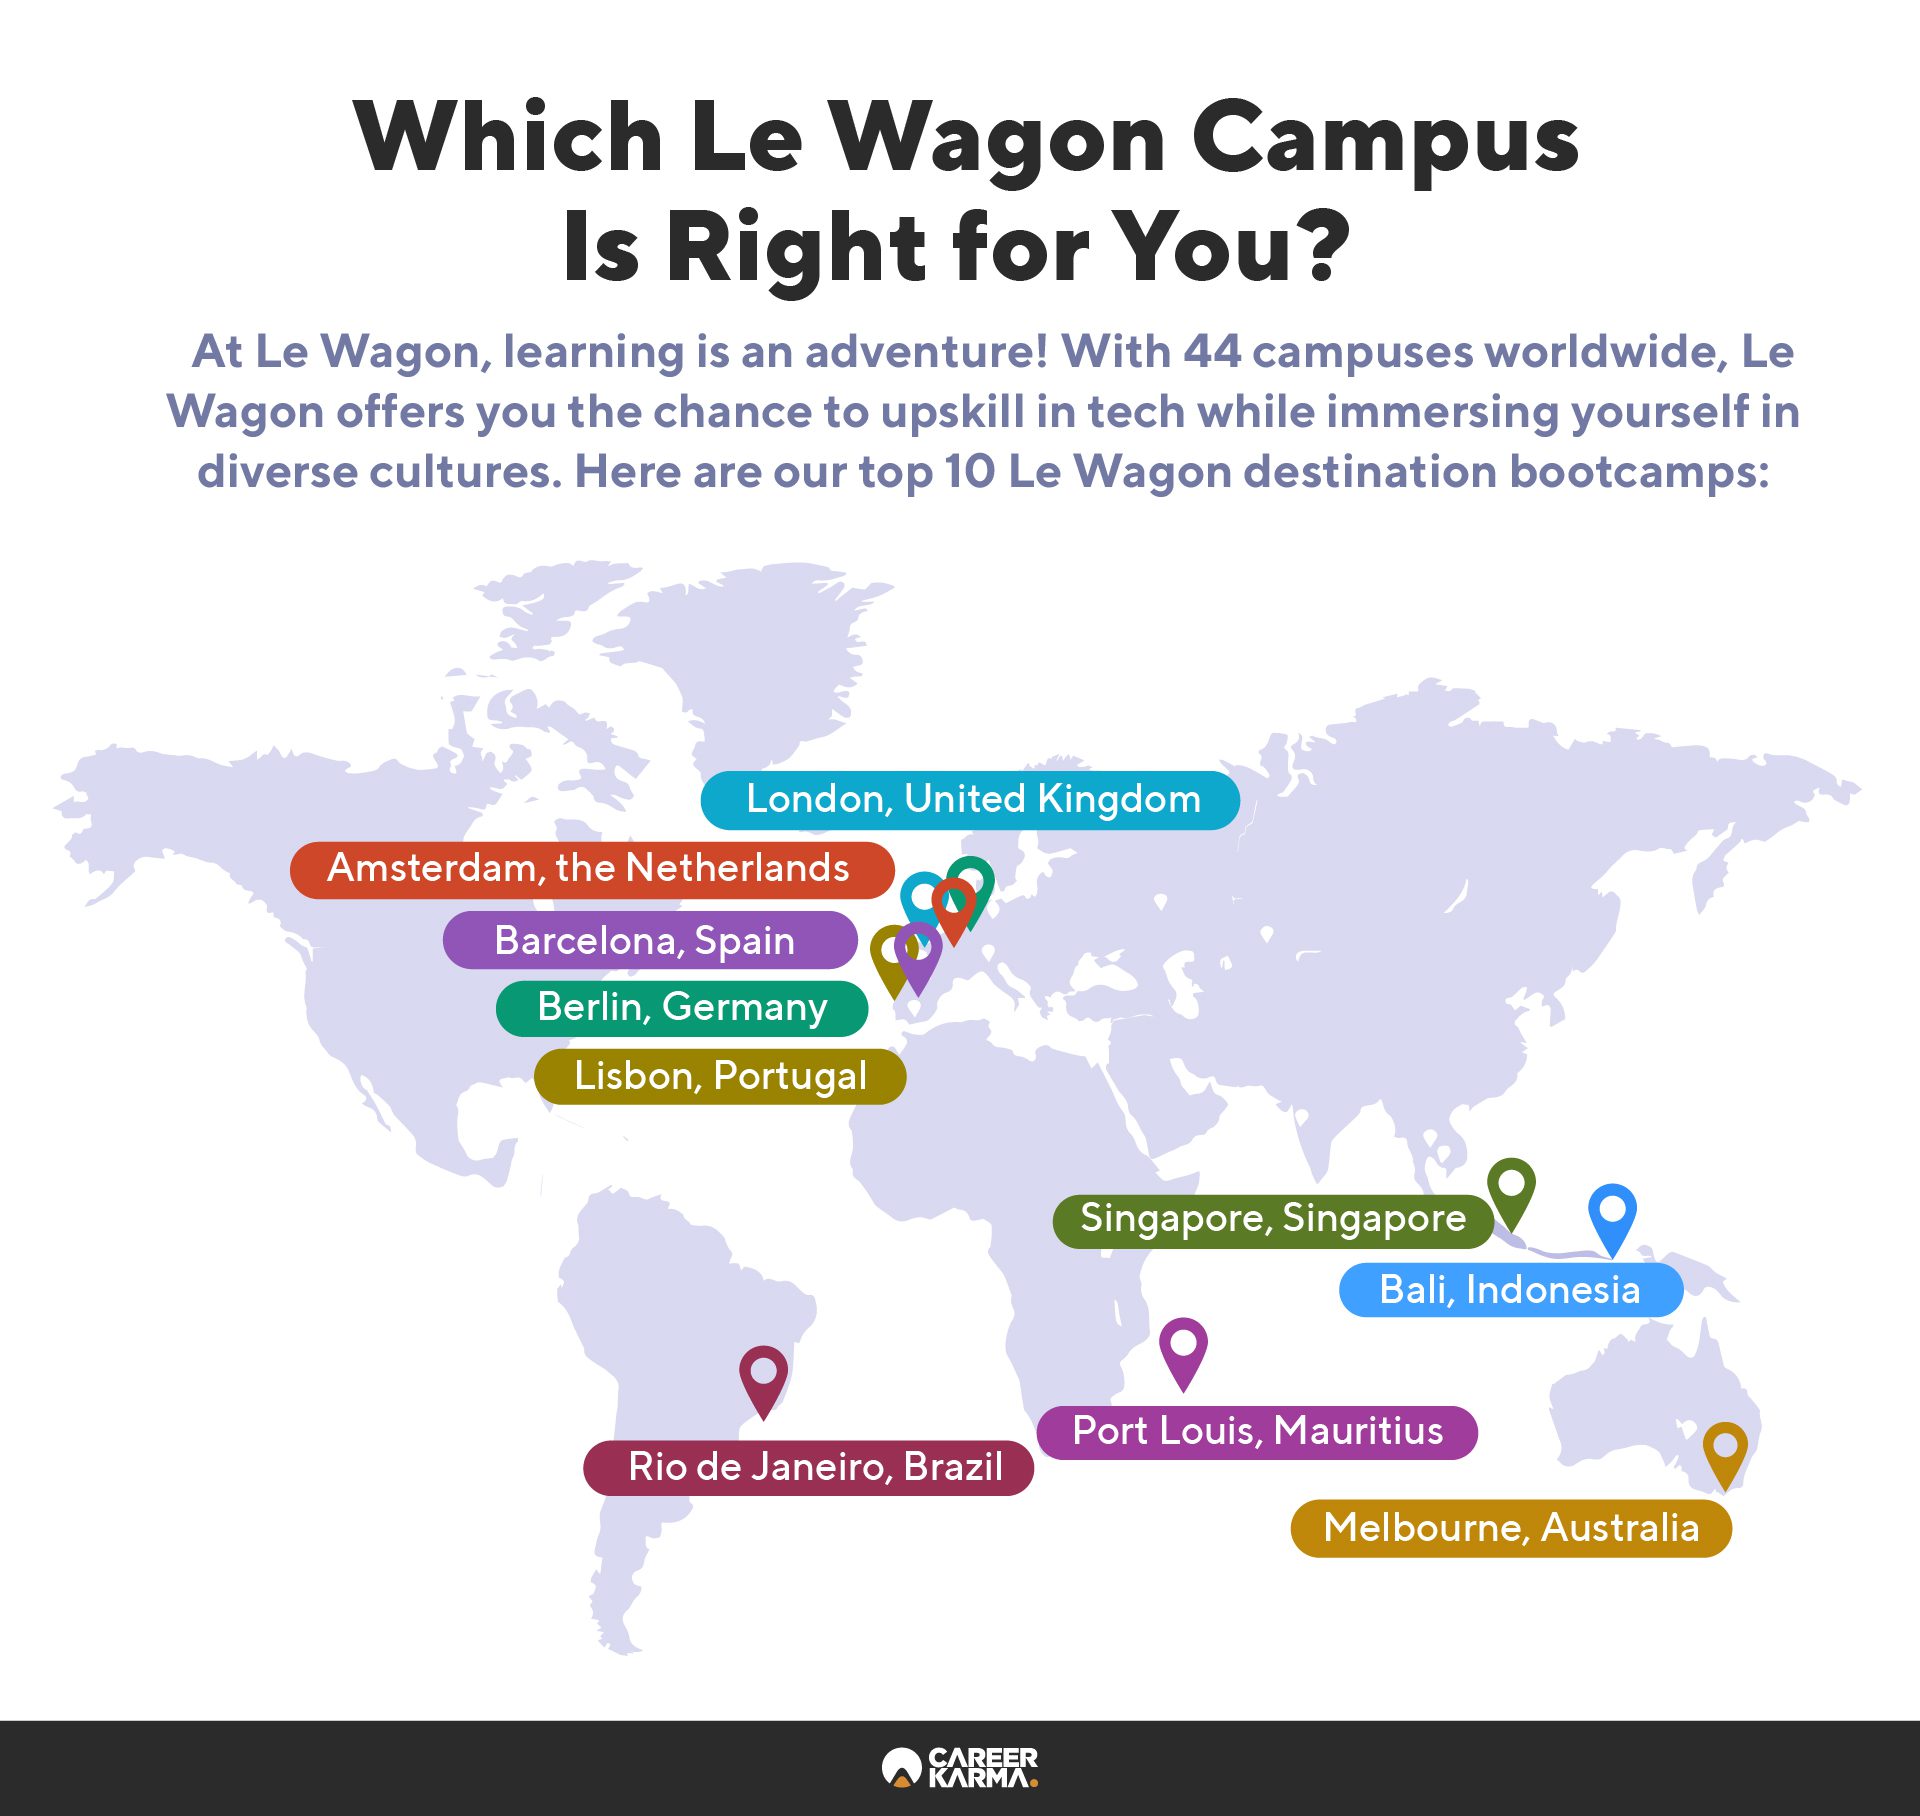 An infographic of some of the best Le Wagon destination bootcamps
